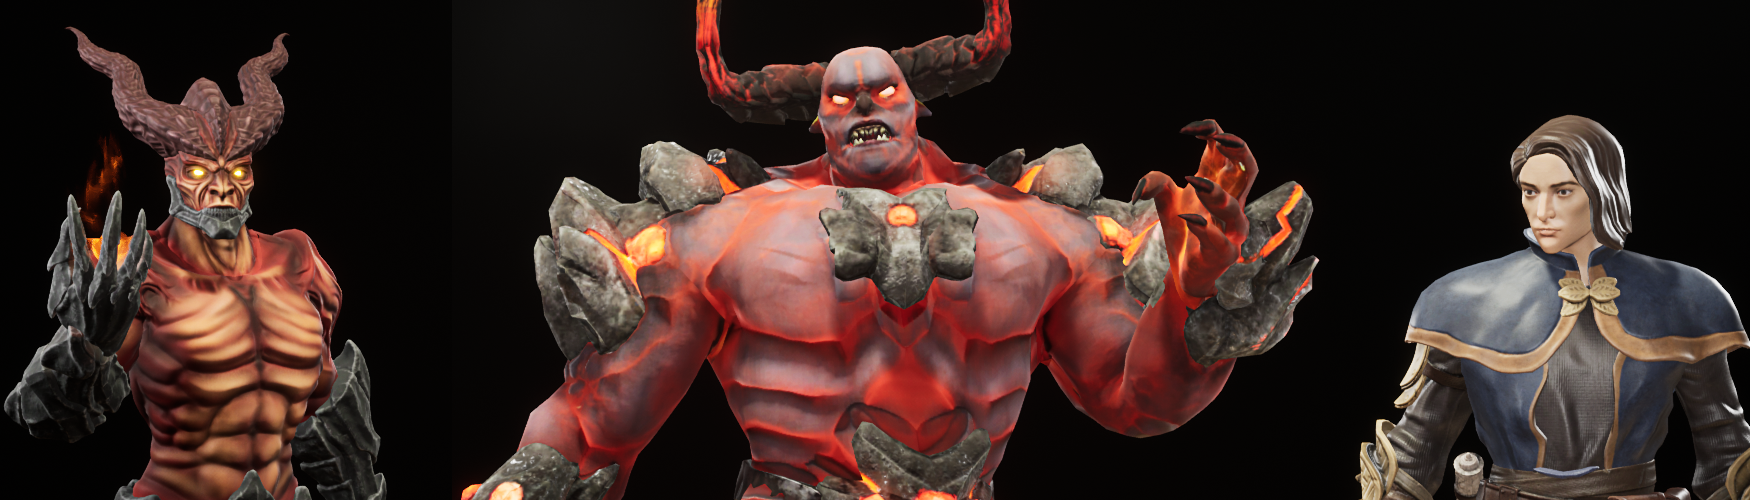 Demons Character Viewer and Asset Pack